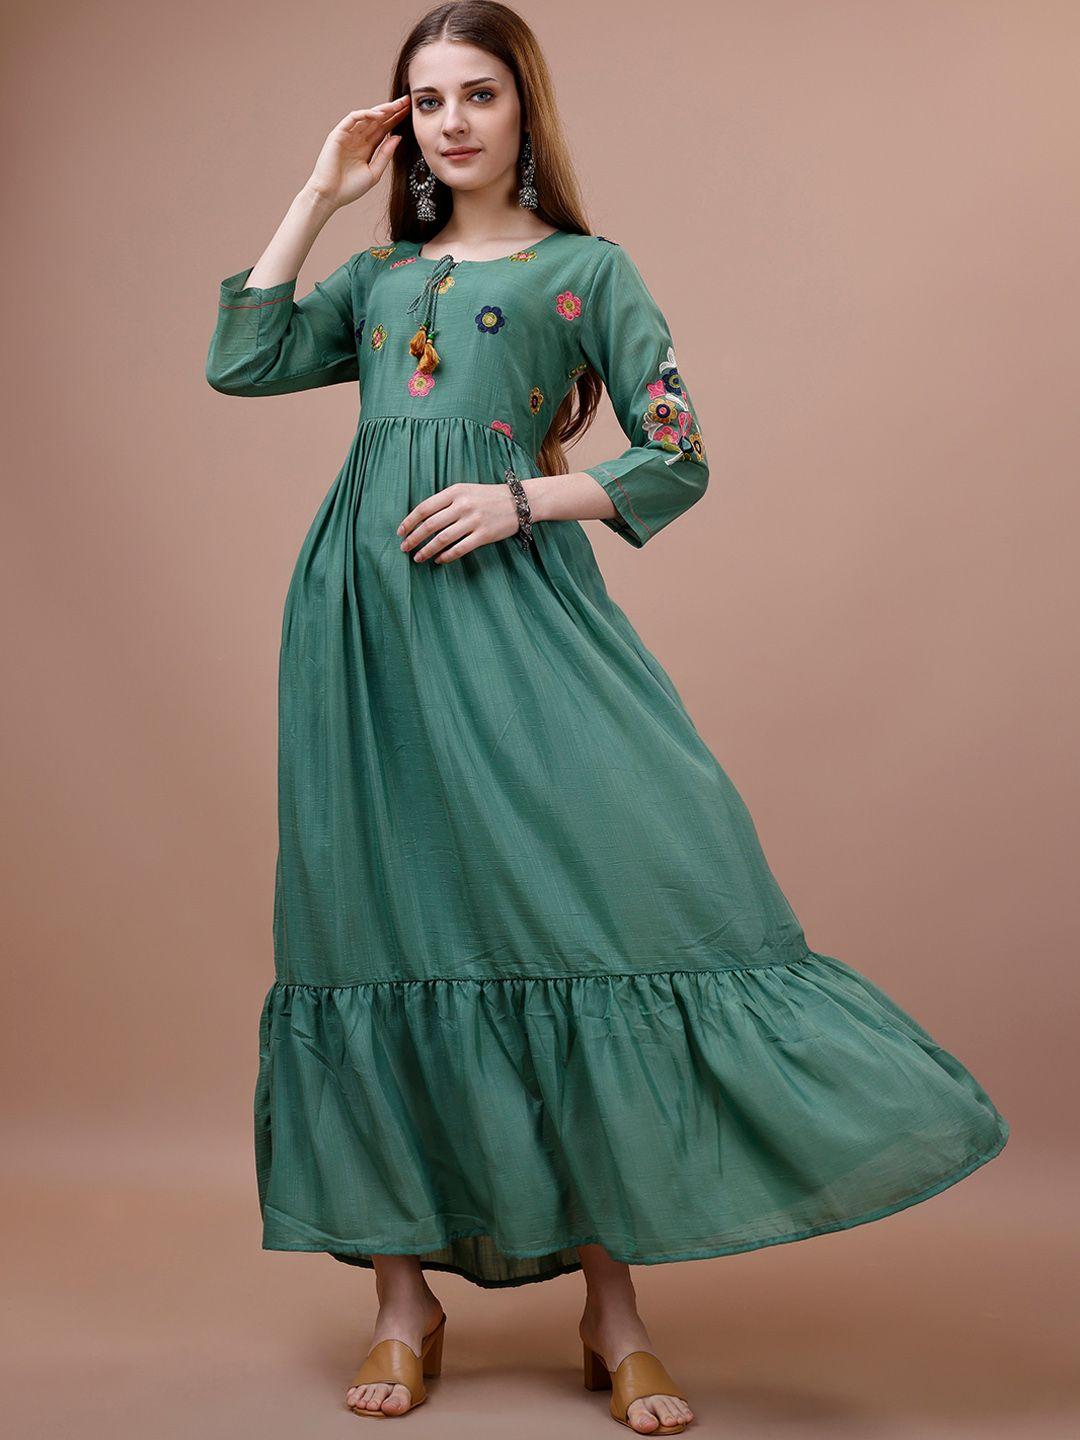 ishin-teal-green-embroidered-fit-&-flare-maxi-cotton-ethnic-dresses